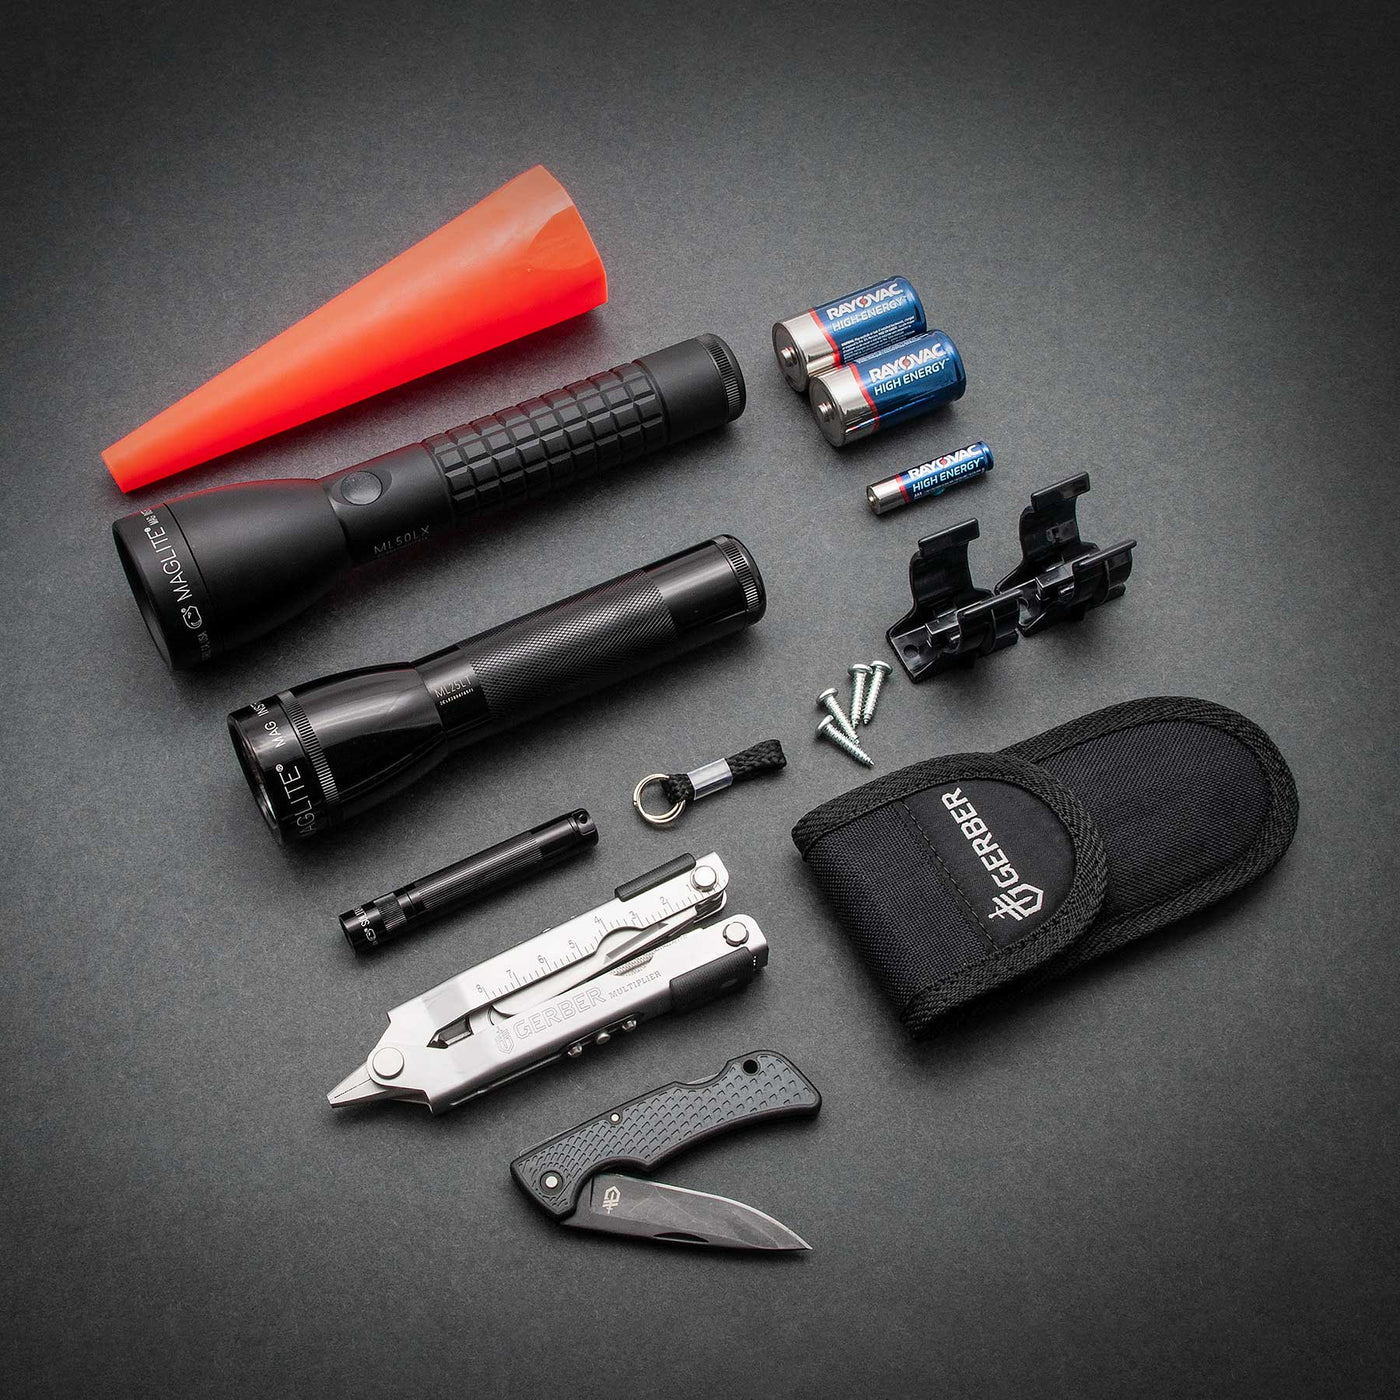 Includes one black Solitaire LED Flashlight, one premium alkaline battery (AAA), and one key-lead (keys not included): one black matte ML50LX LED Flashlight 2C, and Gerber Multi-Tool with carrying case and a US1. It also consists of an ML25LT LED 2C, two premium alkaline batteries (C), C-Cell Mounting Brackets, and a red safety wand for the ML25LT.